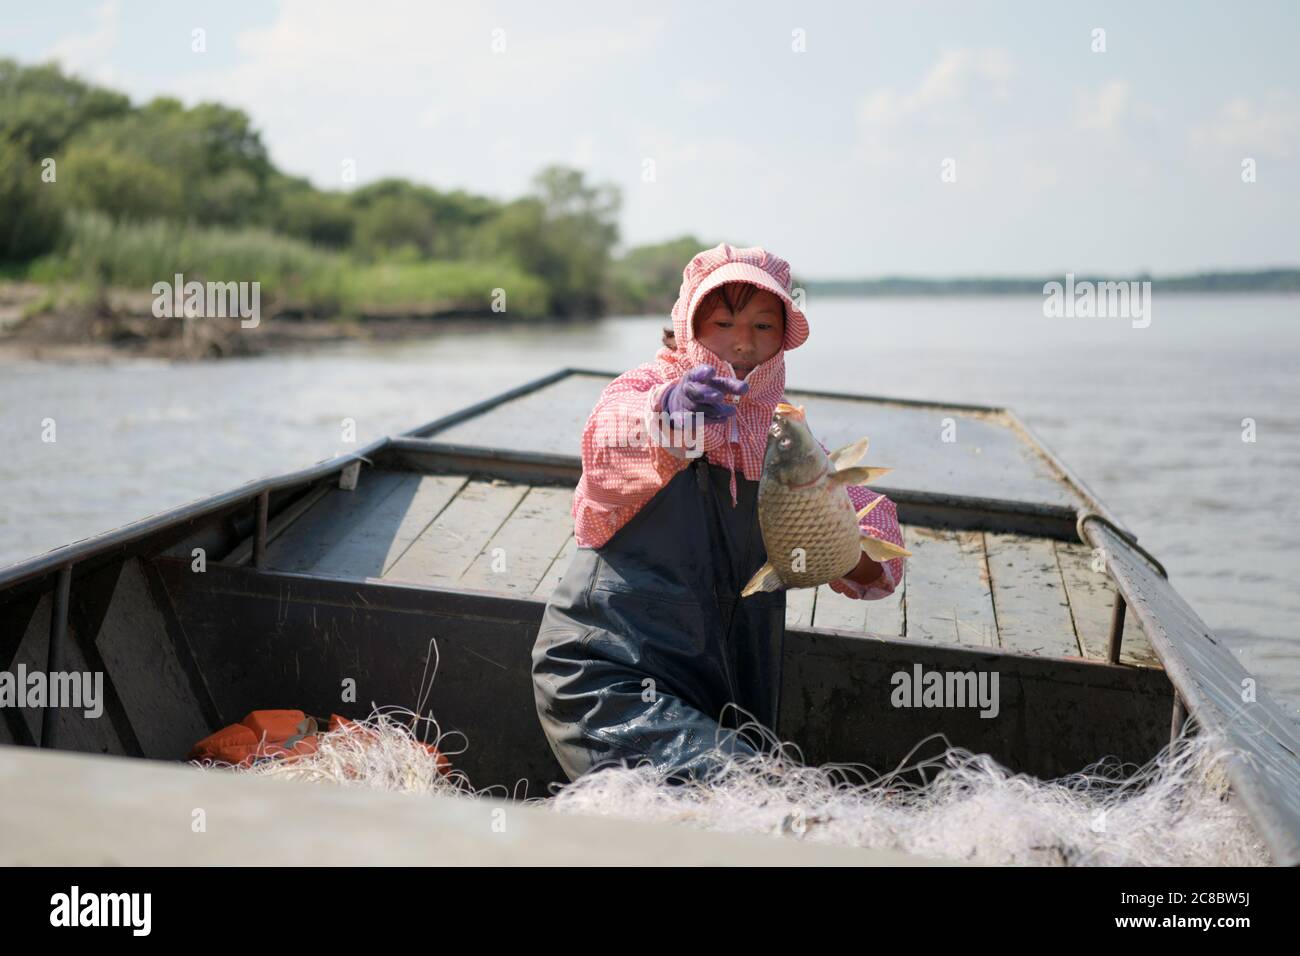 (200723) -- TONGJIANG, July 23, 2020 (Xinhua) -- A fisherwoman throws fish into the boat in Bacha Village, Tongjiang City of northeast China's Heilongjiang Province, July 22, 2020. Bacha Village, dominated by people of Hezhe ethnic minority, has led a way of poverty relief through developing economy suited to local conditions. All the 14 registered poor families have shaken off poverty. The per-capita disposable income of villagers has been raised to 22,150 yuan (about 3,168 US dollars) in 2019 from 16,102 yuan (about 2,303 US dollars) in 2015. (Xinhua/Wang Jianwei) Stock Photo